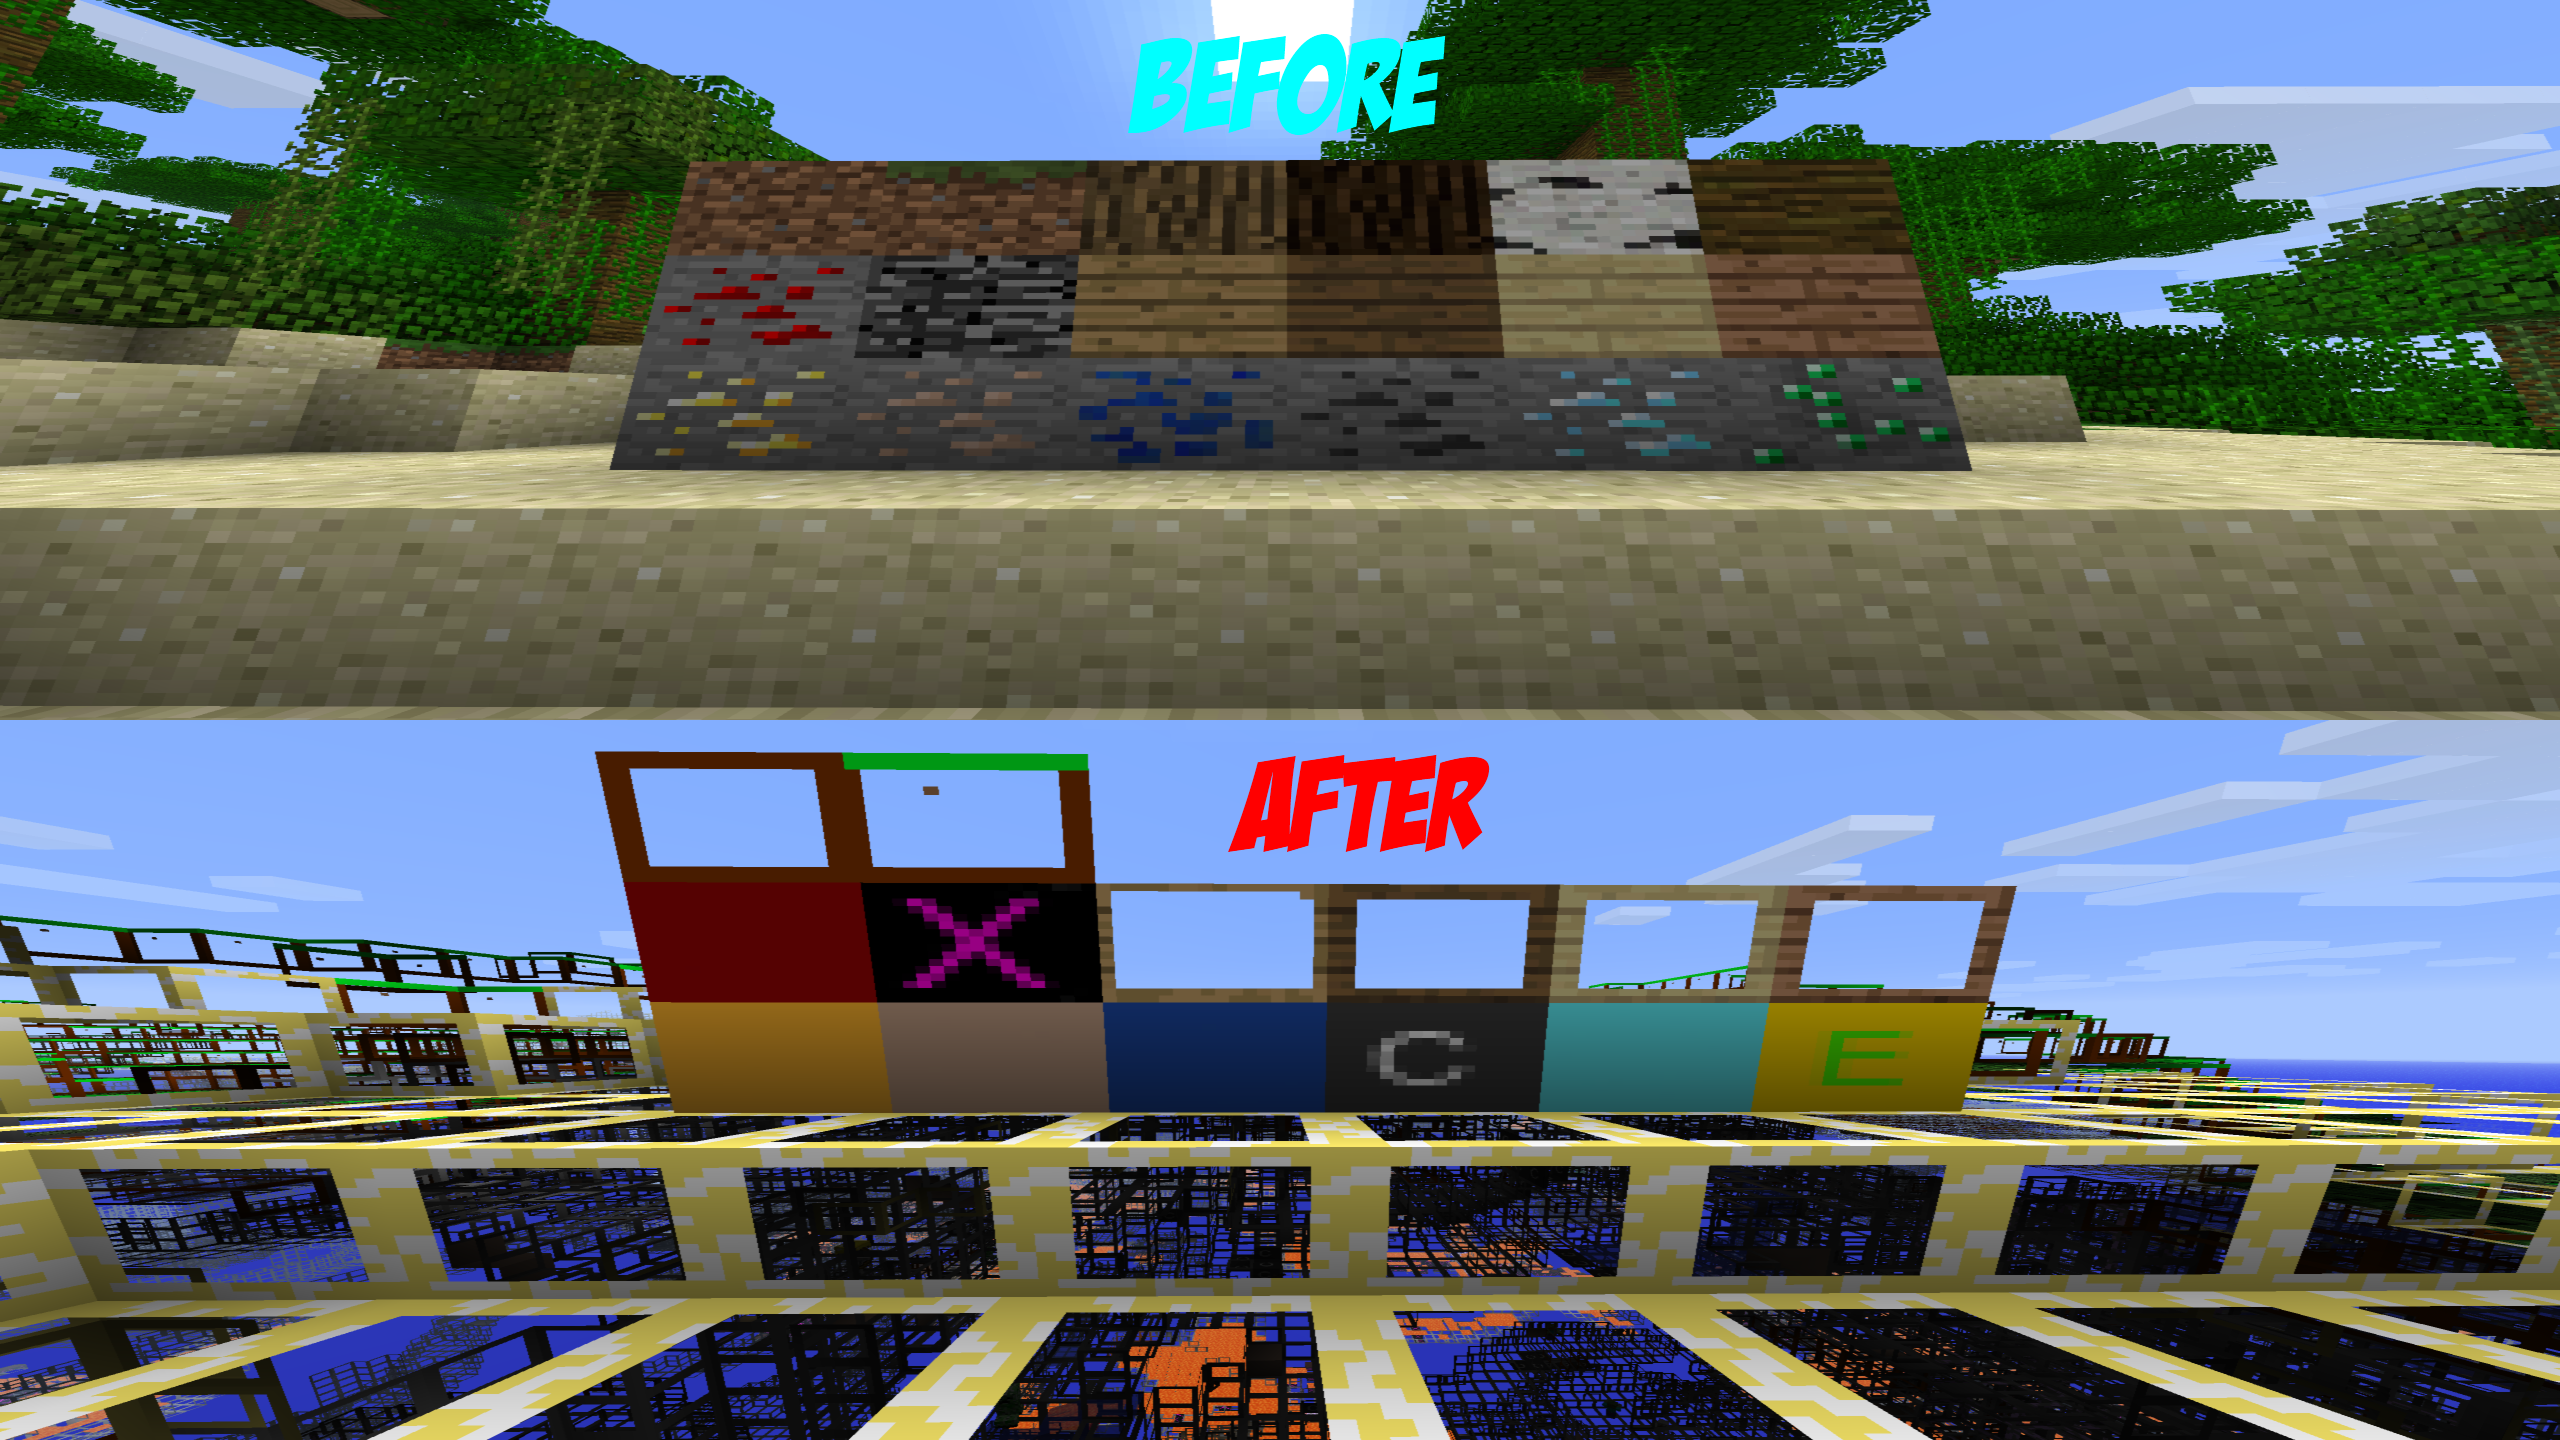 x ray texture pack download